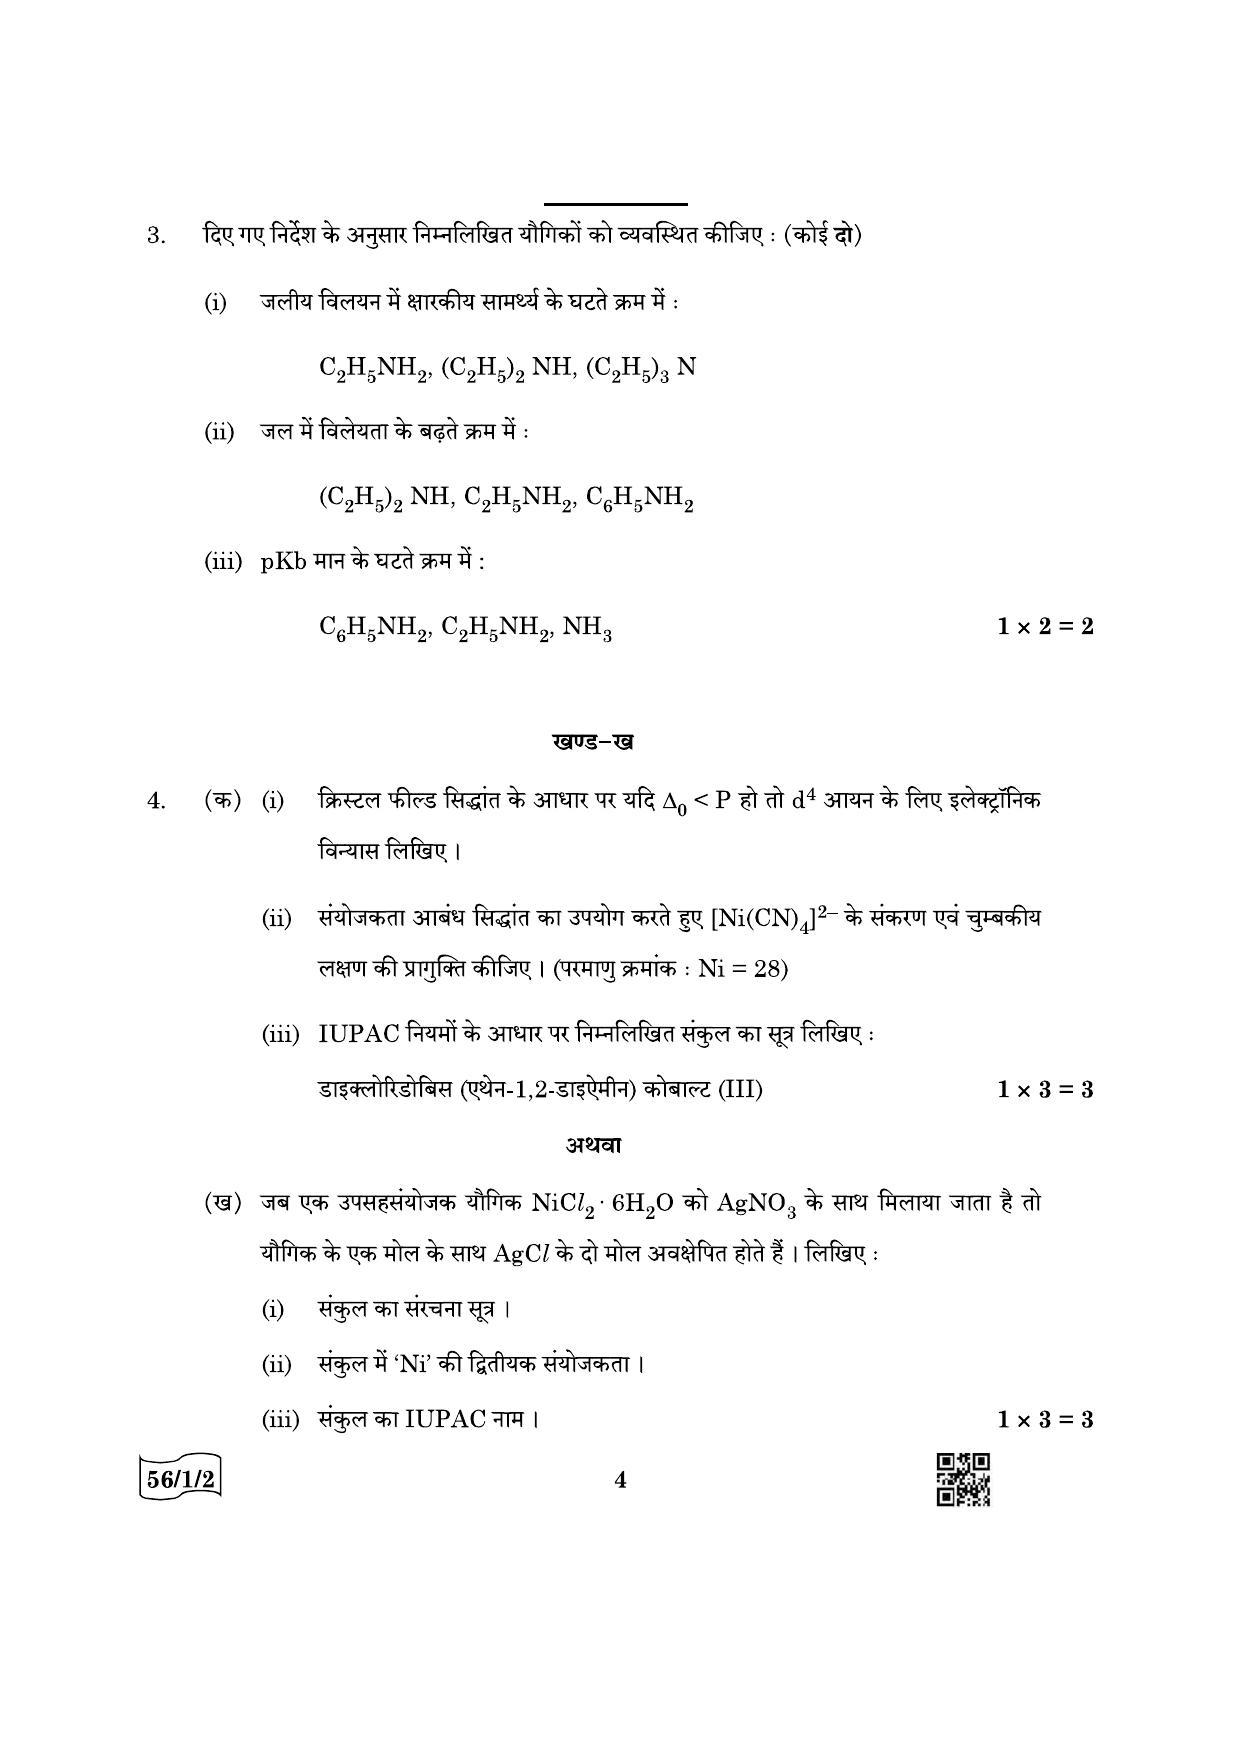 CBSE Class 12 56-1-2 Chemistry 2022 Question Paper - Page 4